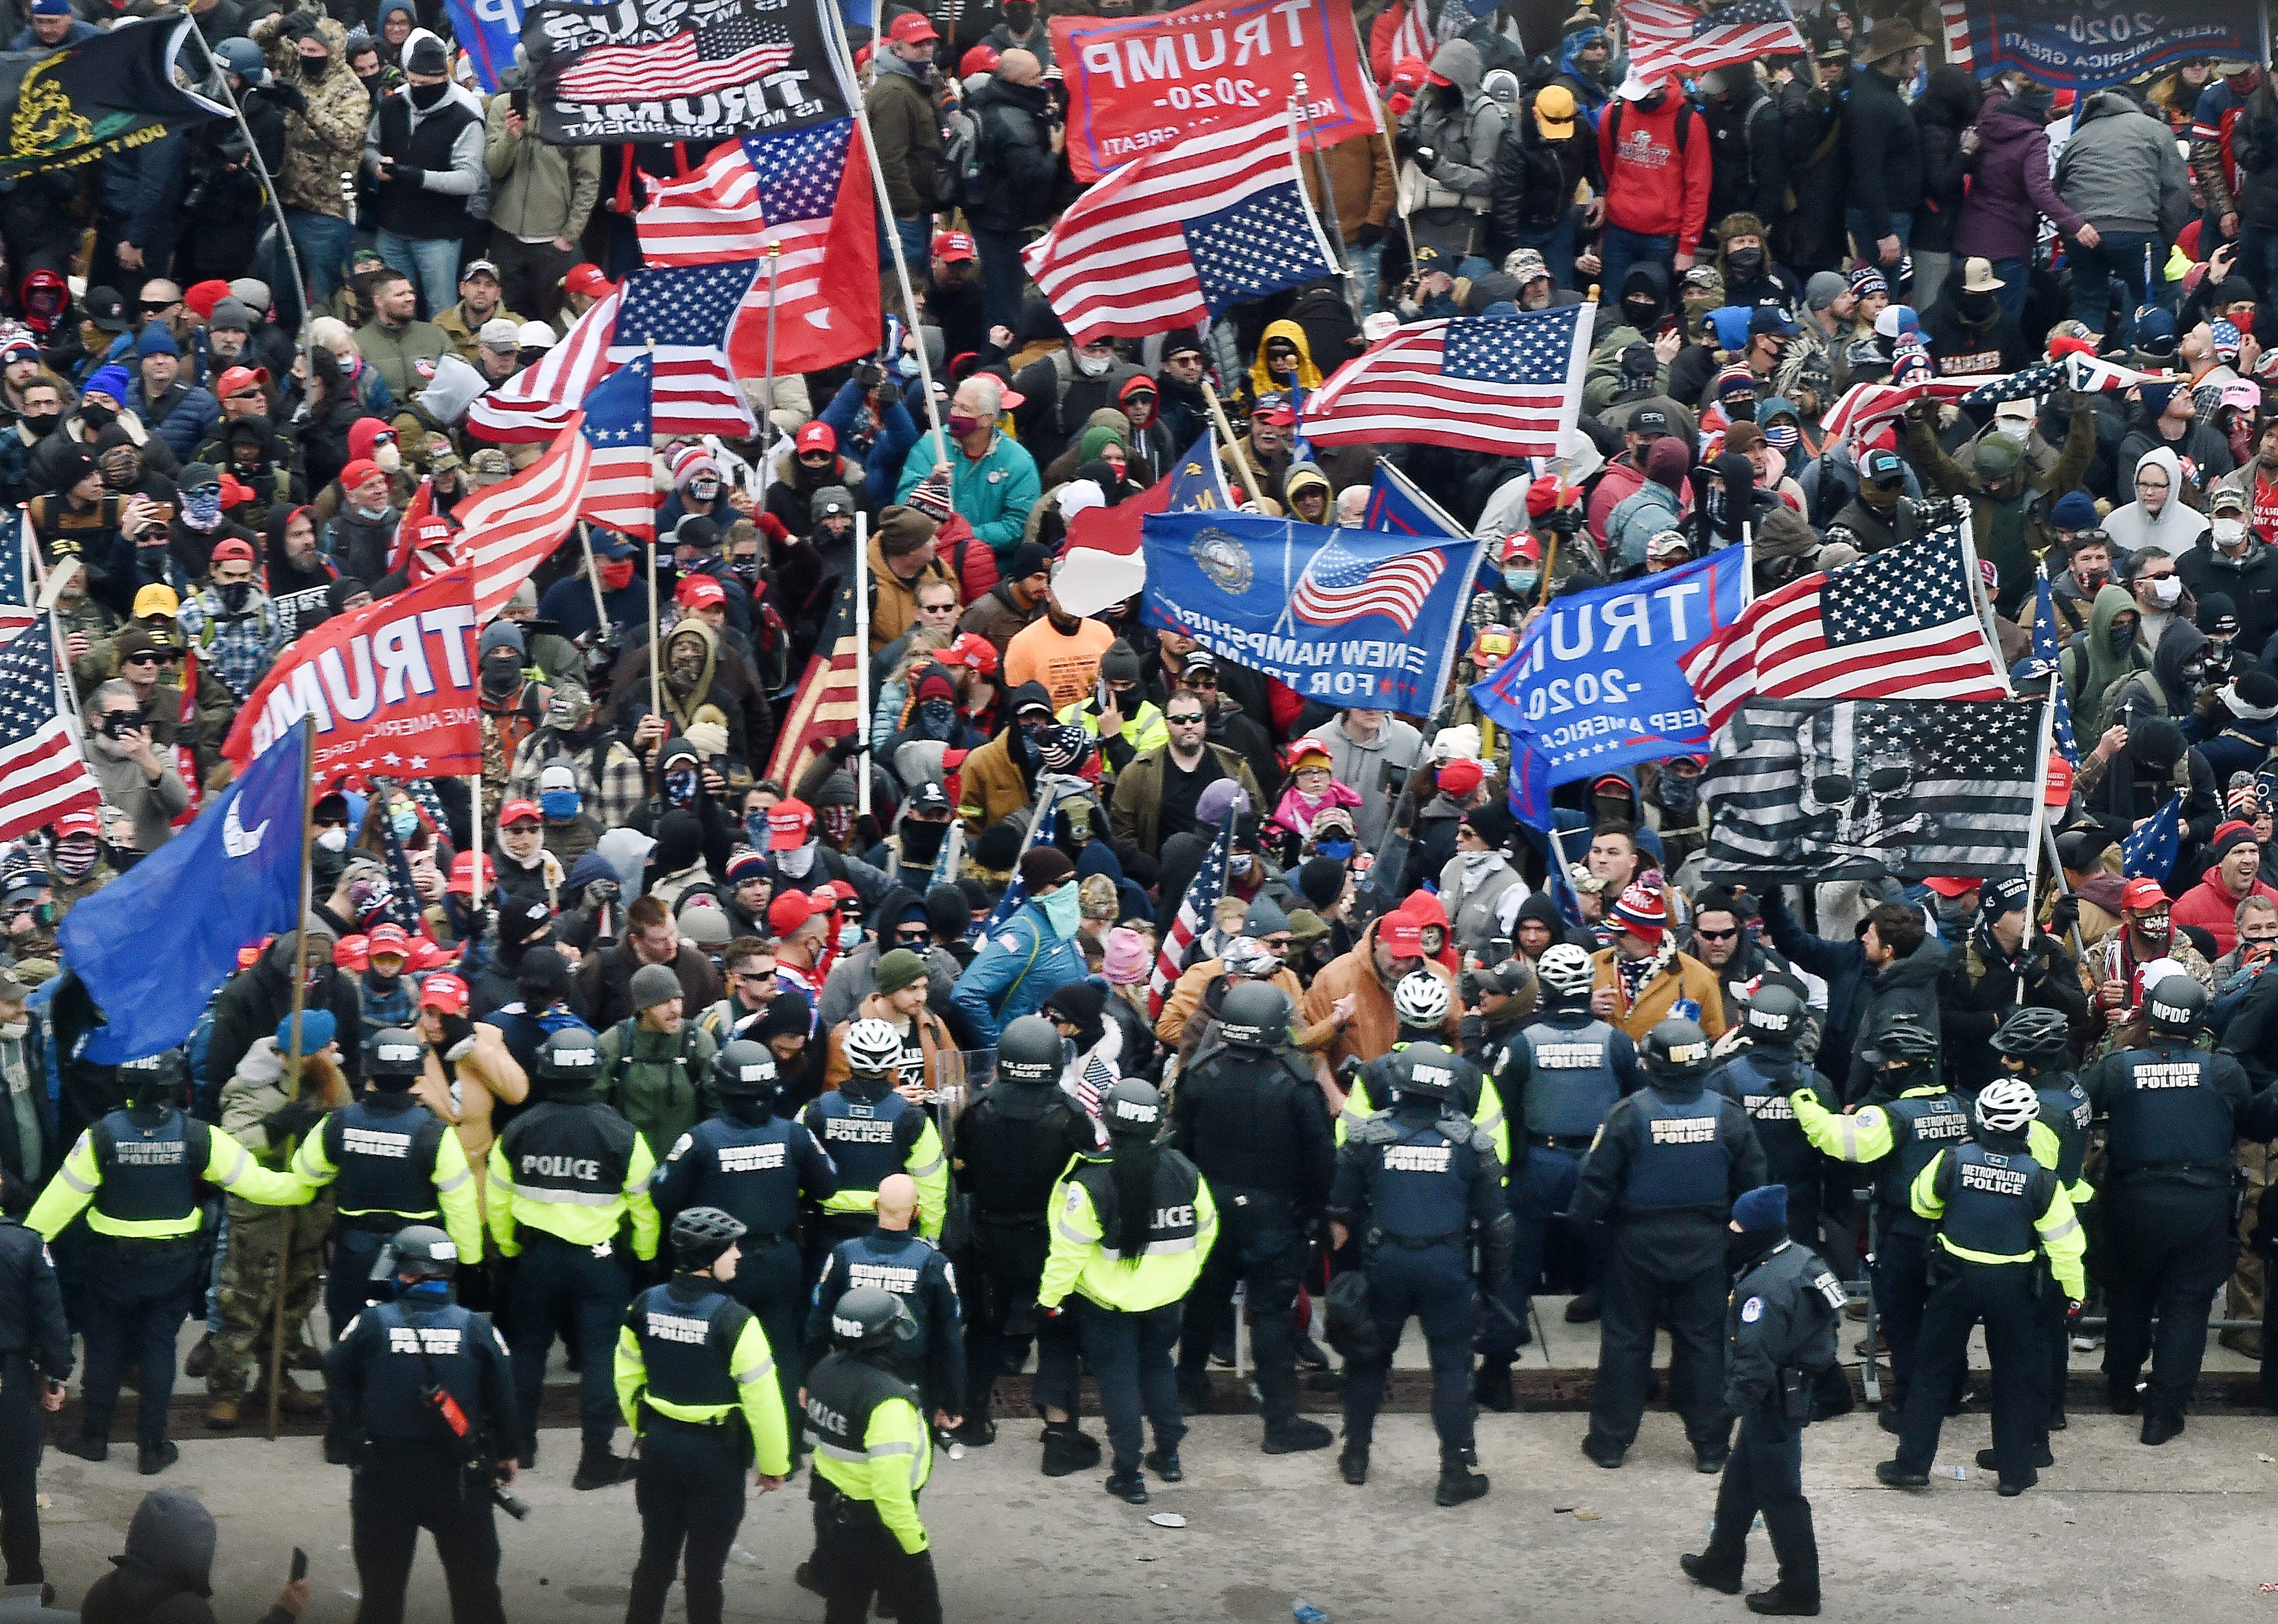 Pro-Trump supporters stormed the U.S. Capitol on Wednesday and quickly overran unprepared U.S. Capitol Police officers on the scene. Lawmakers and other staffers had to be evacuated after rioters breached the building. CREDIT: Olivier Douliery/AFP via Getty Images